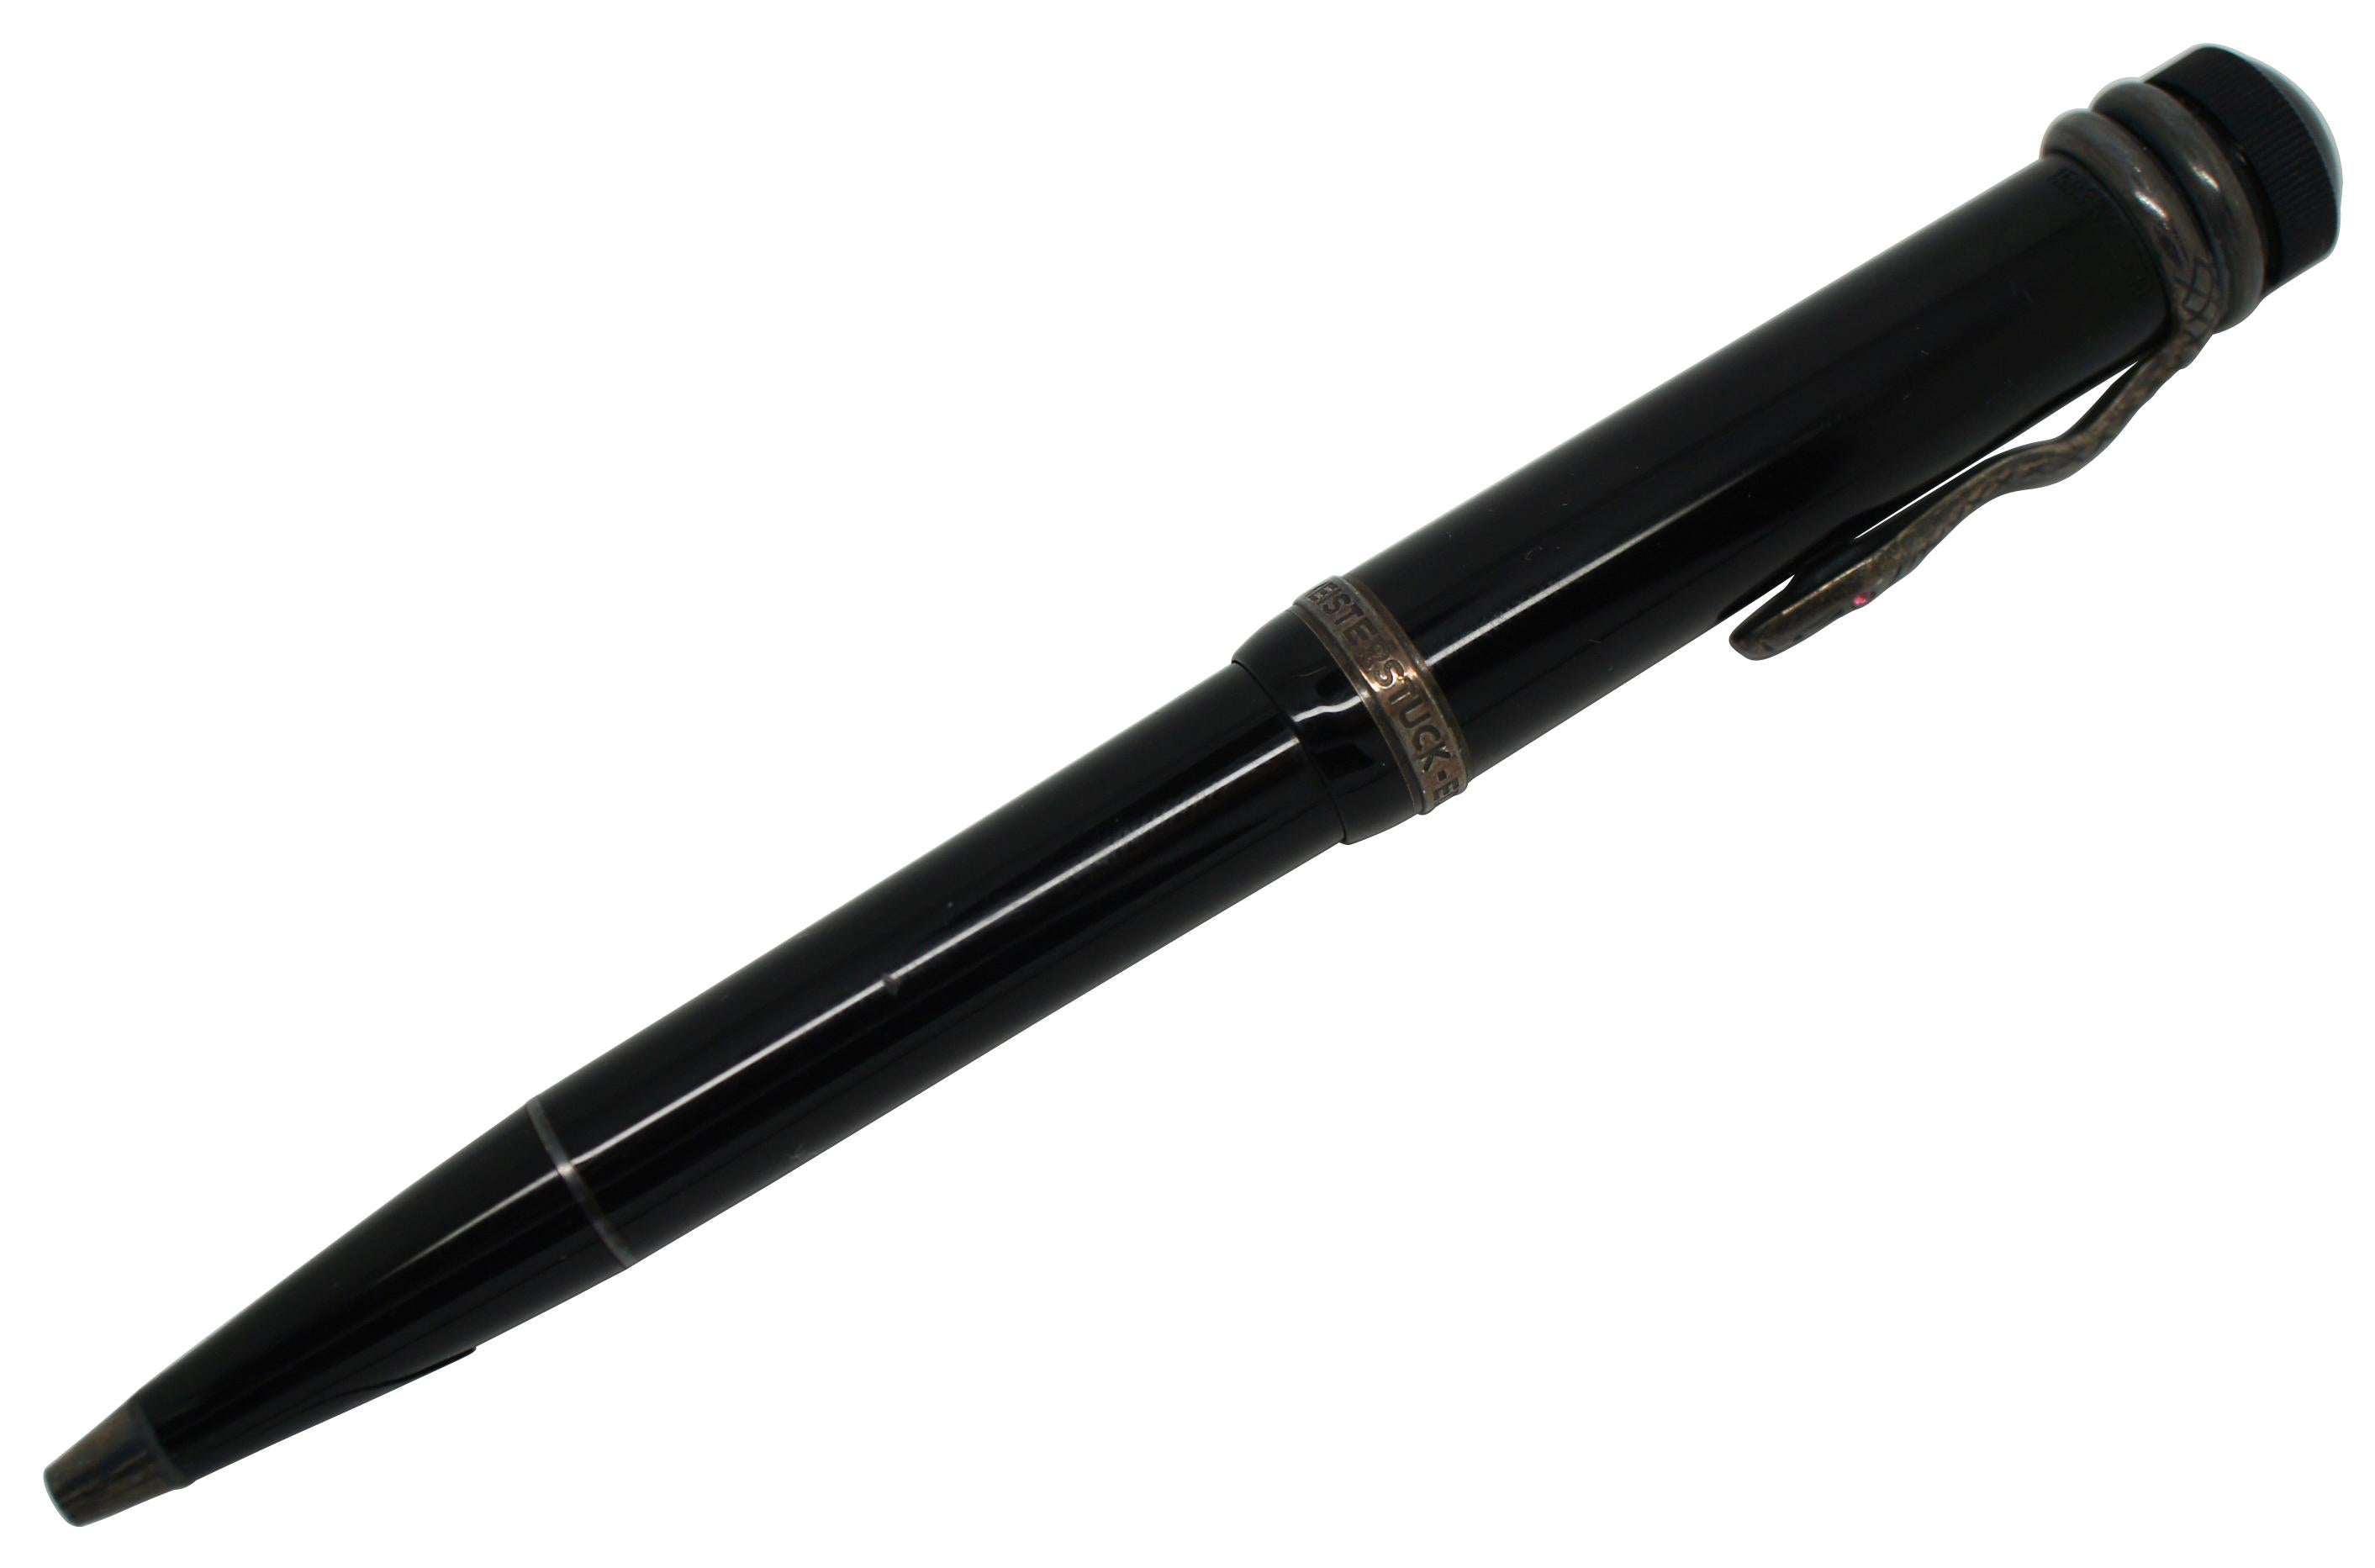 montblanc pen with snake